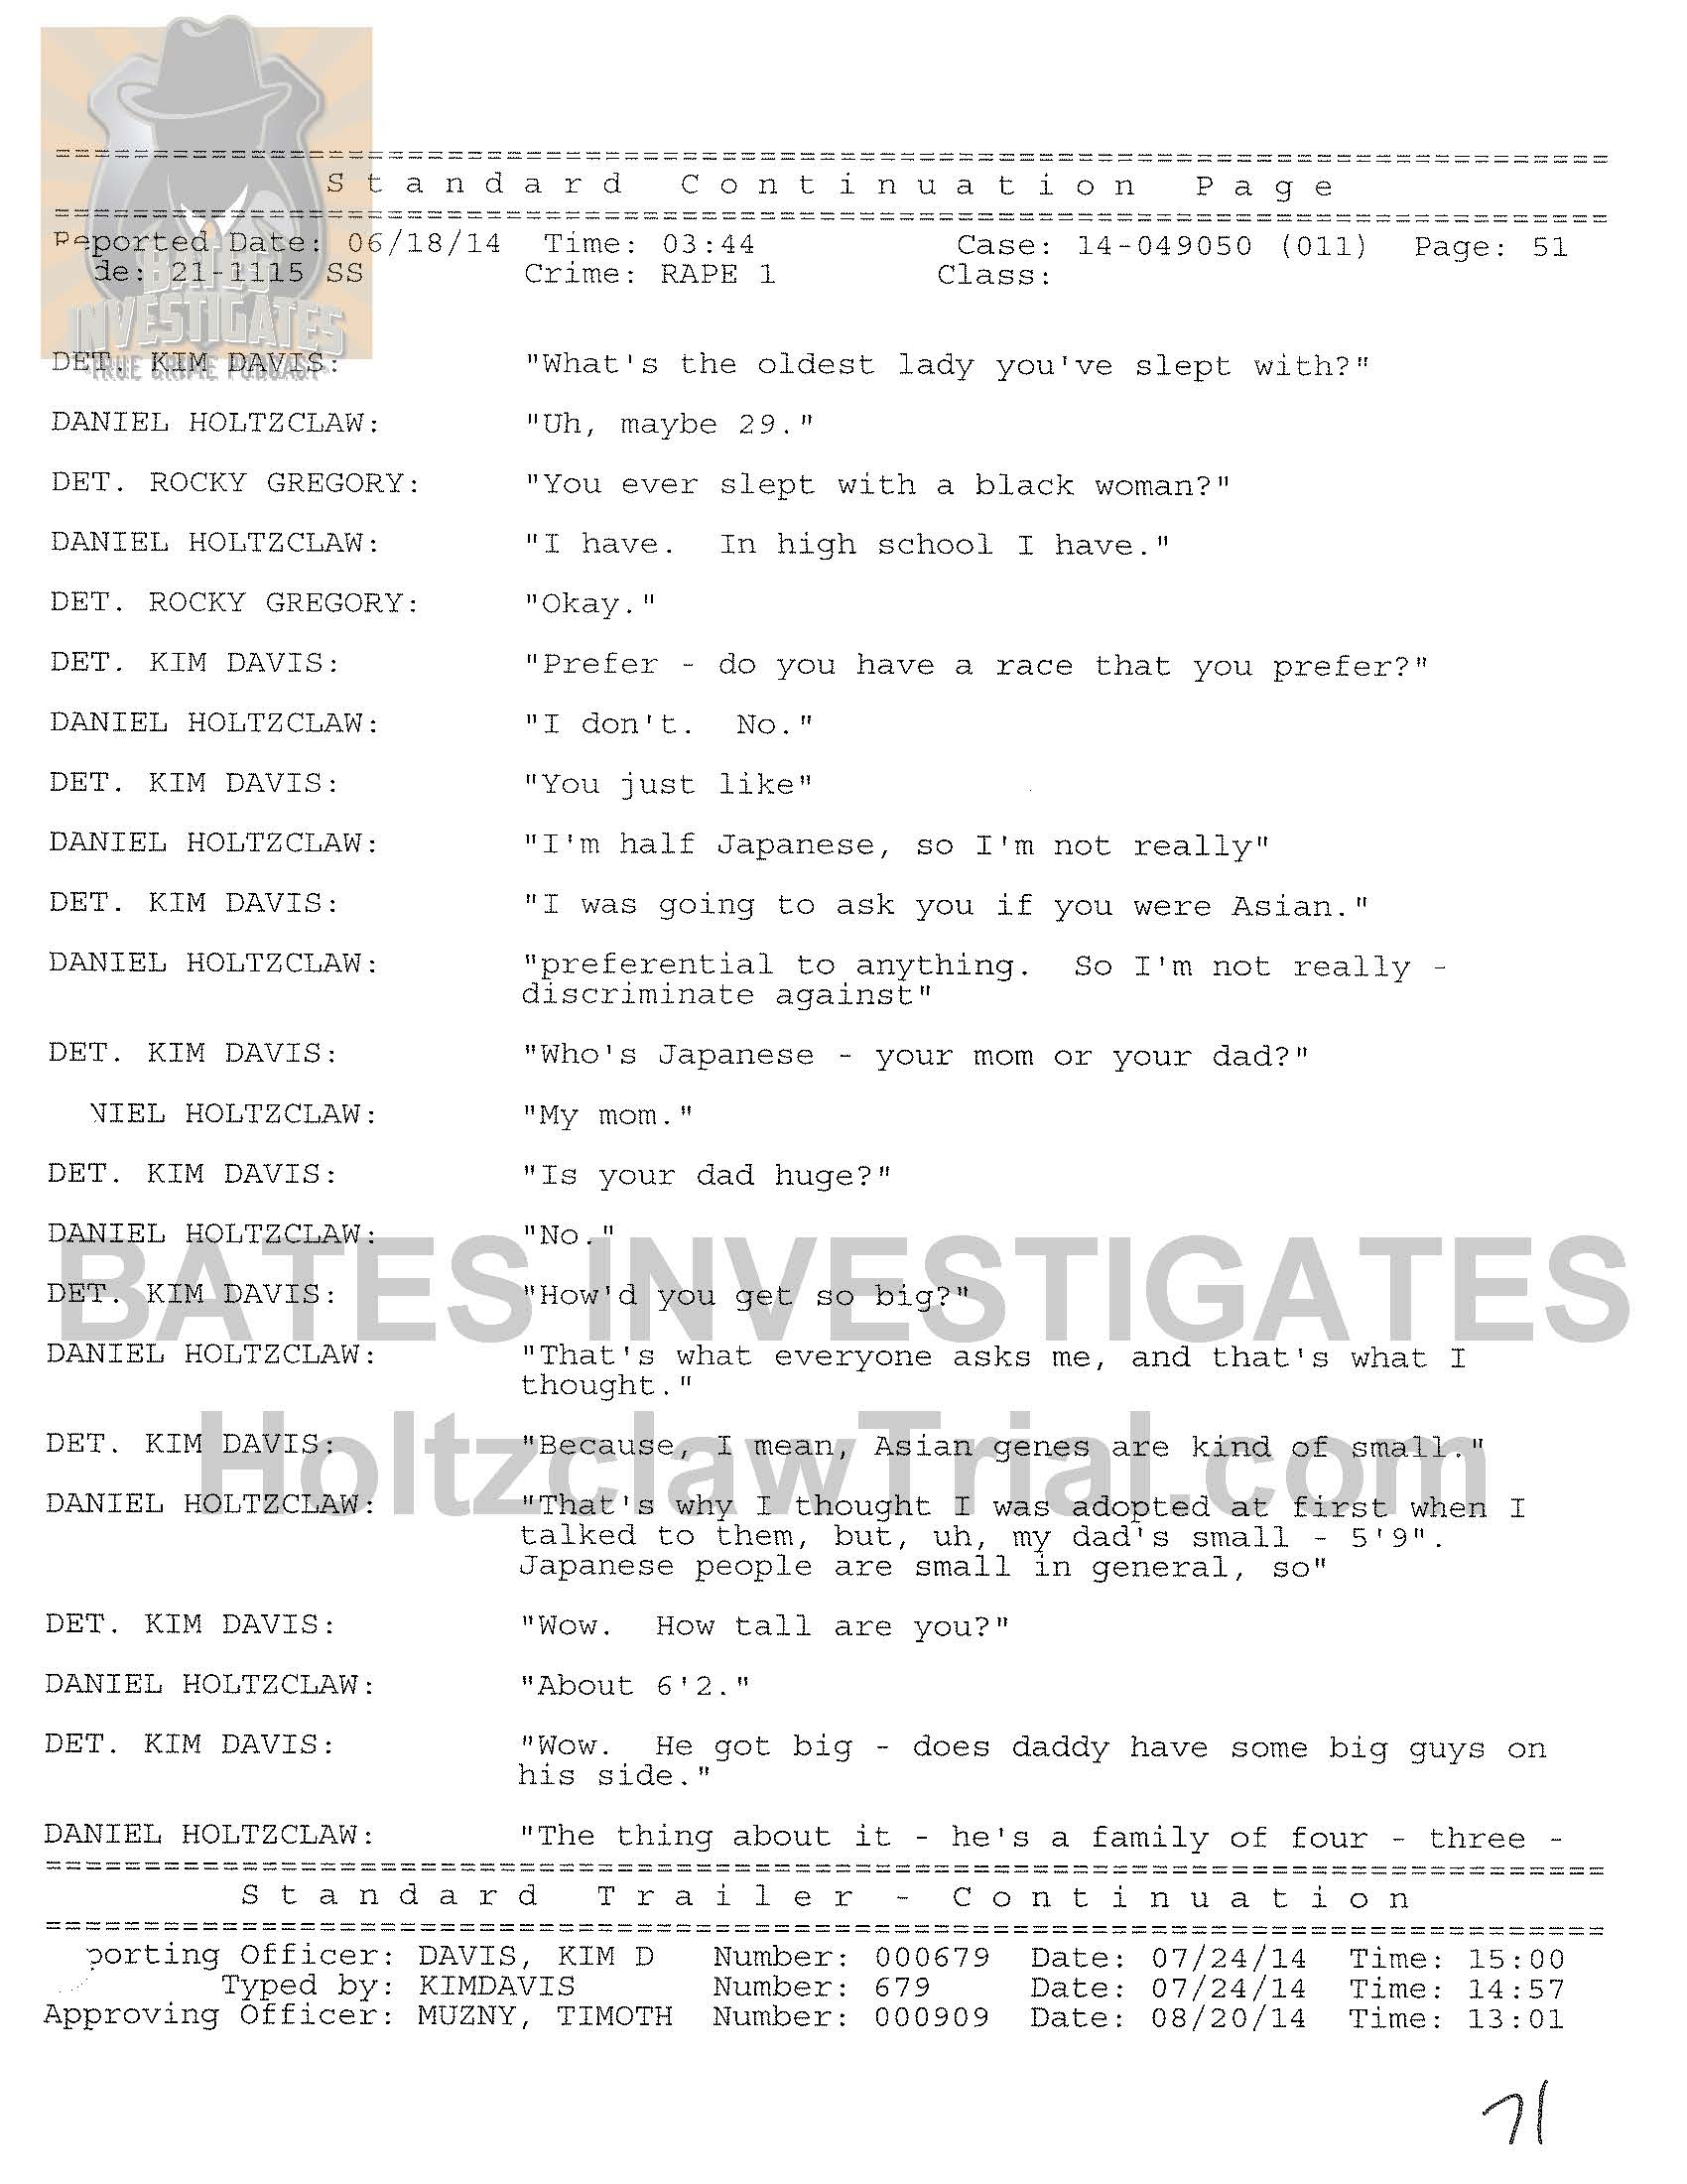 Holtzclaw Interrogation Transcript - Ep02 Redacted_Page_51.jpg